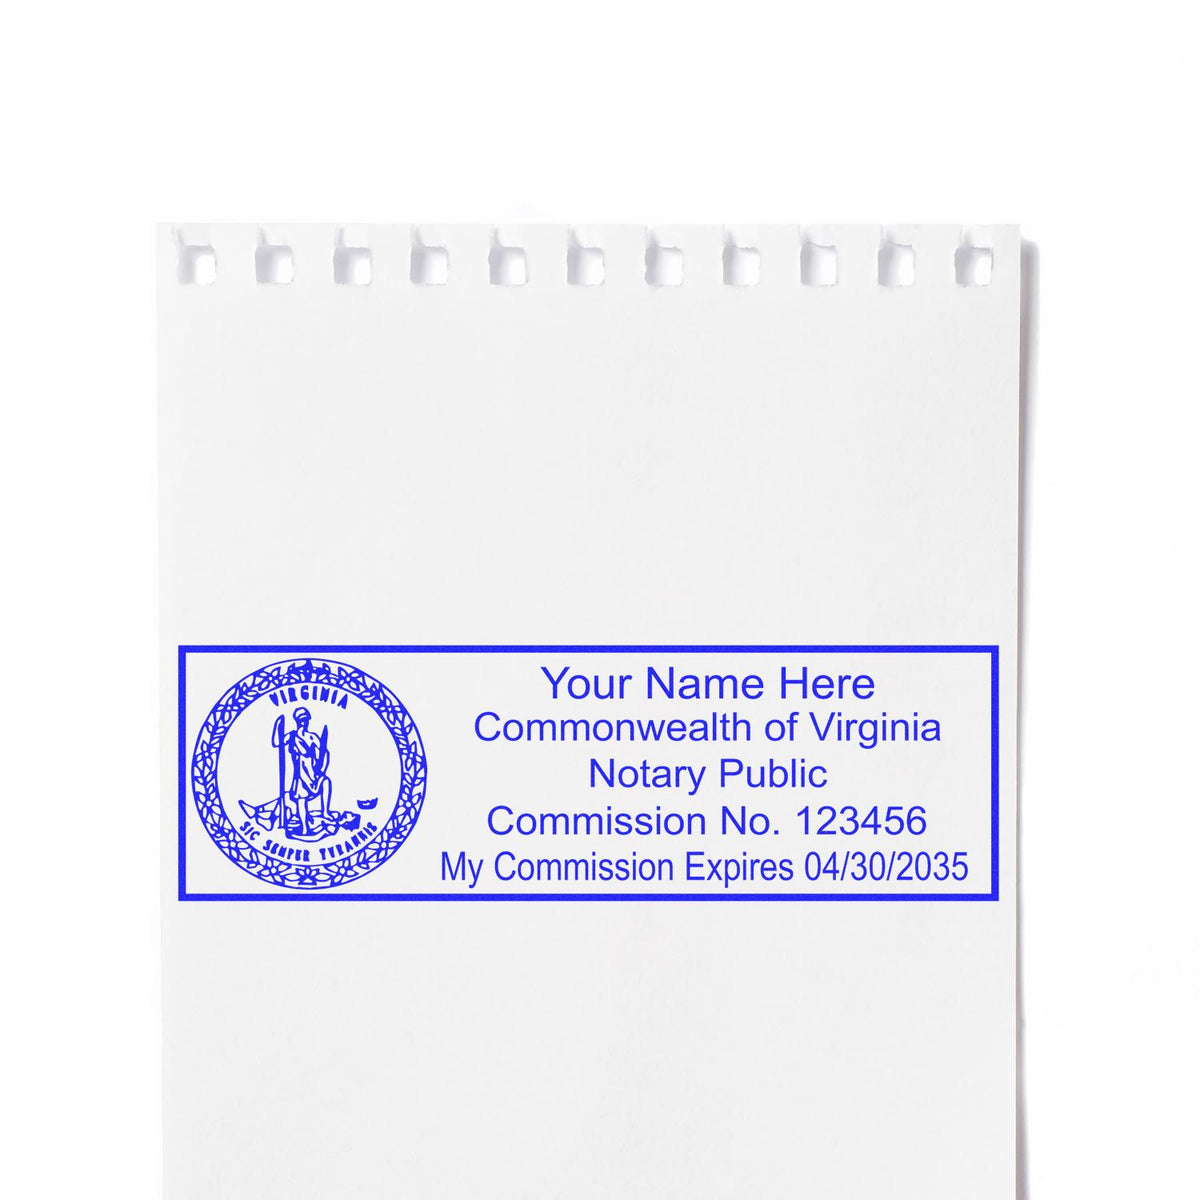 An alternative view of the PSI Virginia Notary Stamp stamped on a sheet of paper showing the image in use